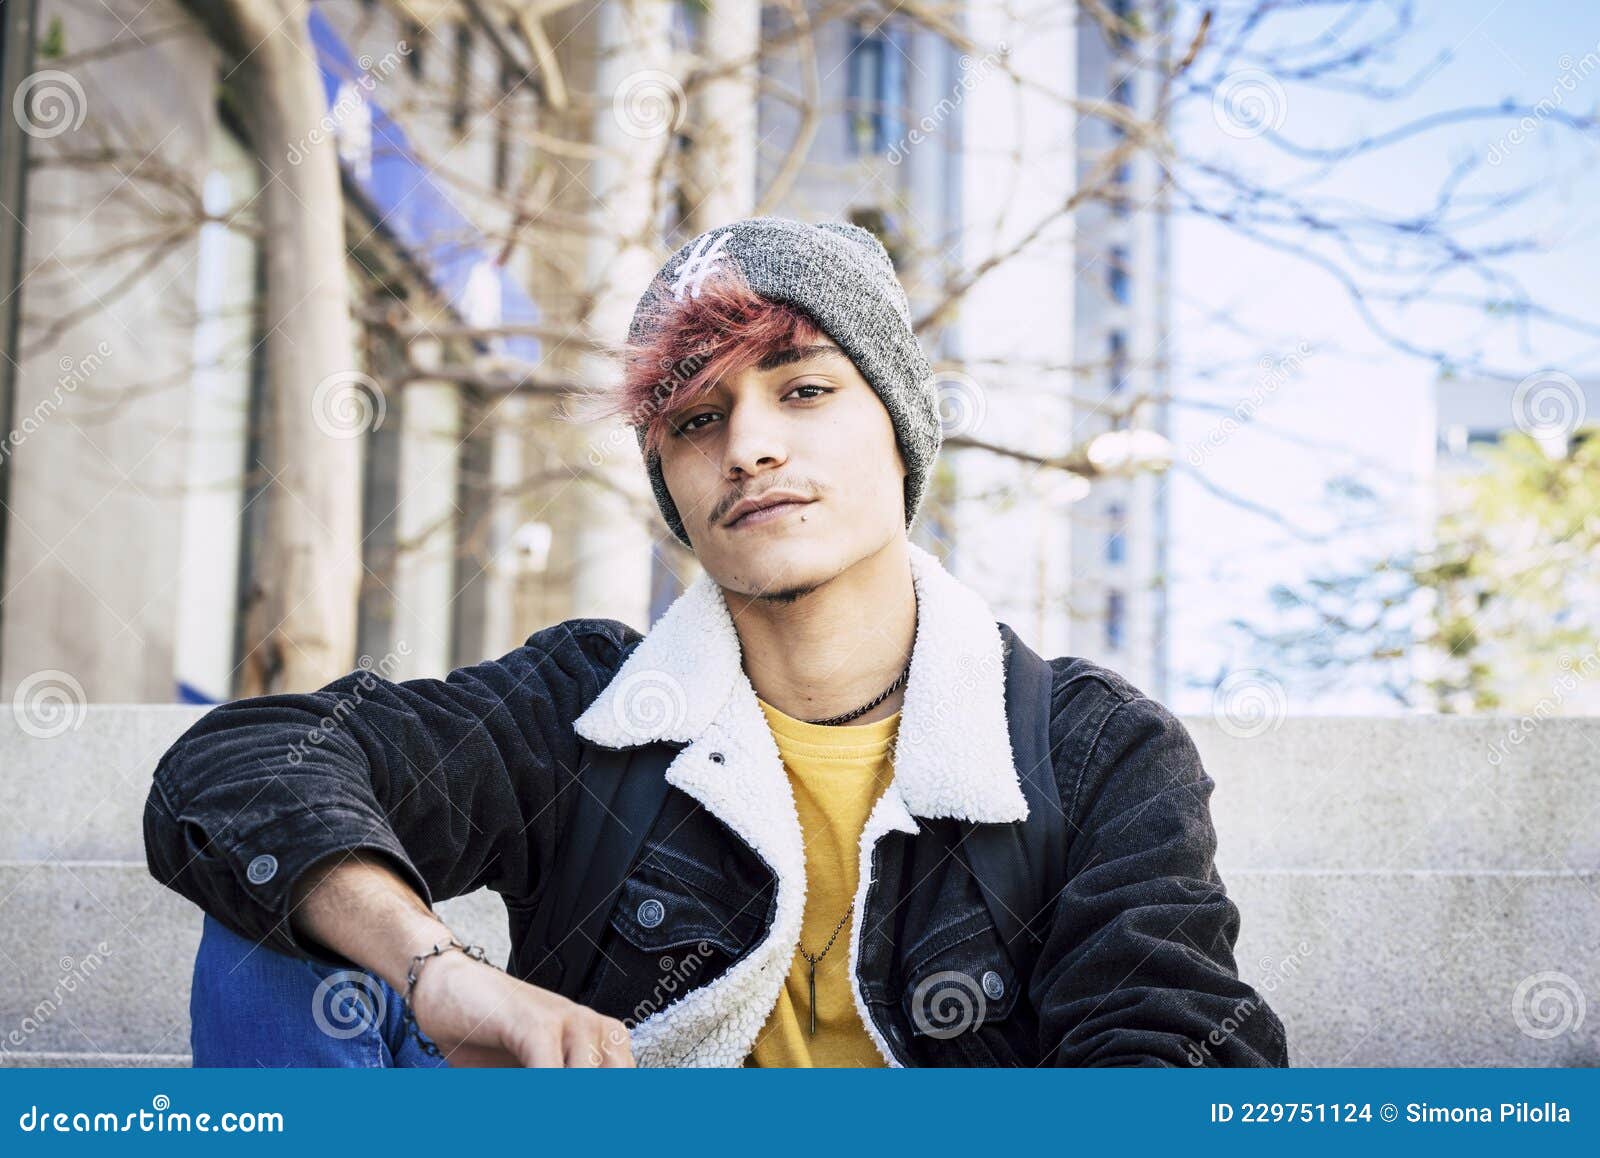 Stylish Handsome Teenage Boy in Knit Hat and Denim Jacket with Burgundy Hair  Color Posing while Sitting on Steps Outdoors in the Stock Photo - Image of  branch, rebel: 229751124